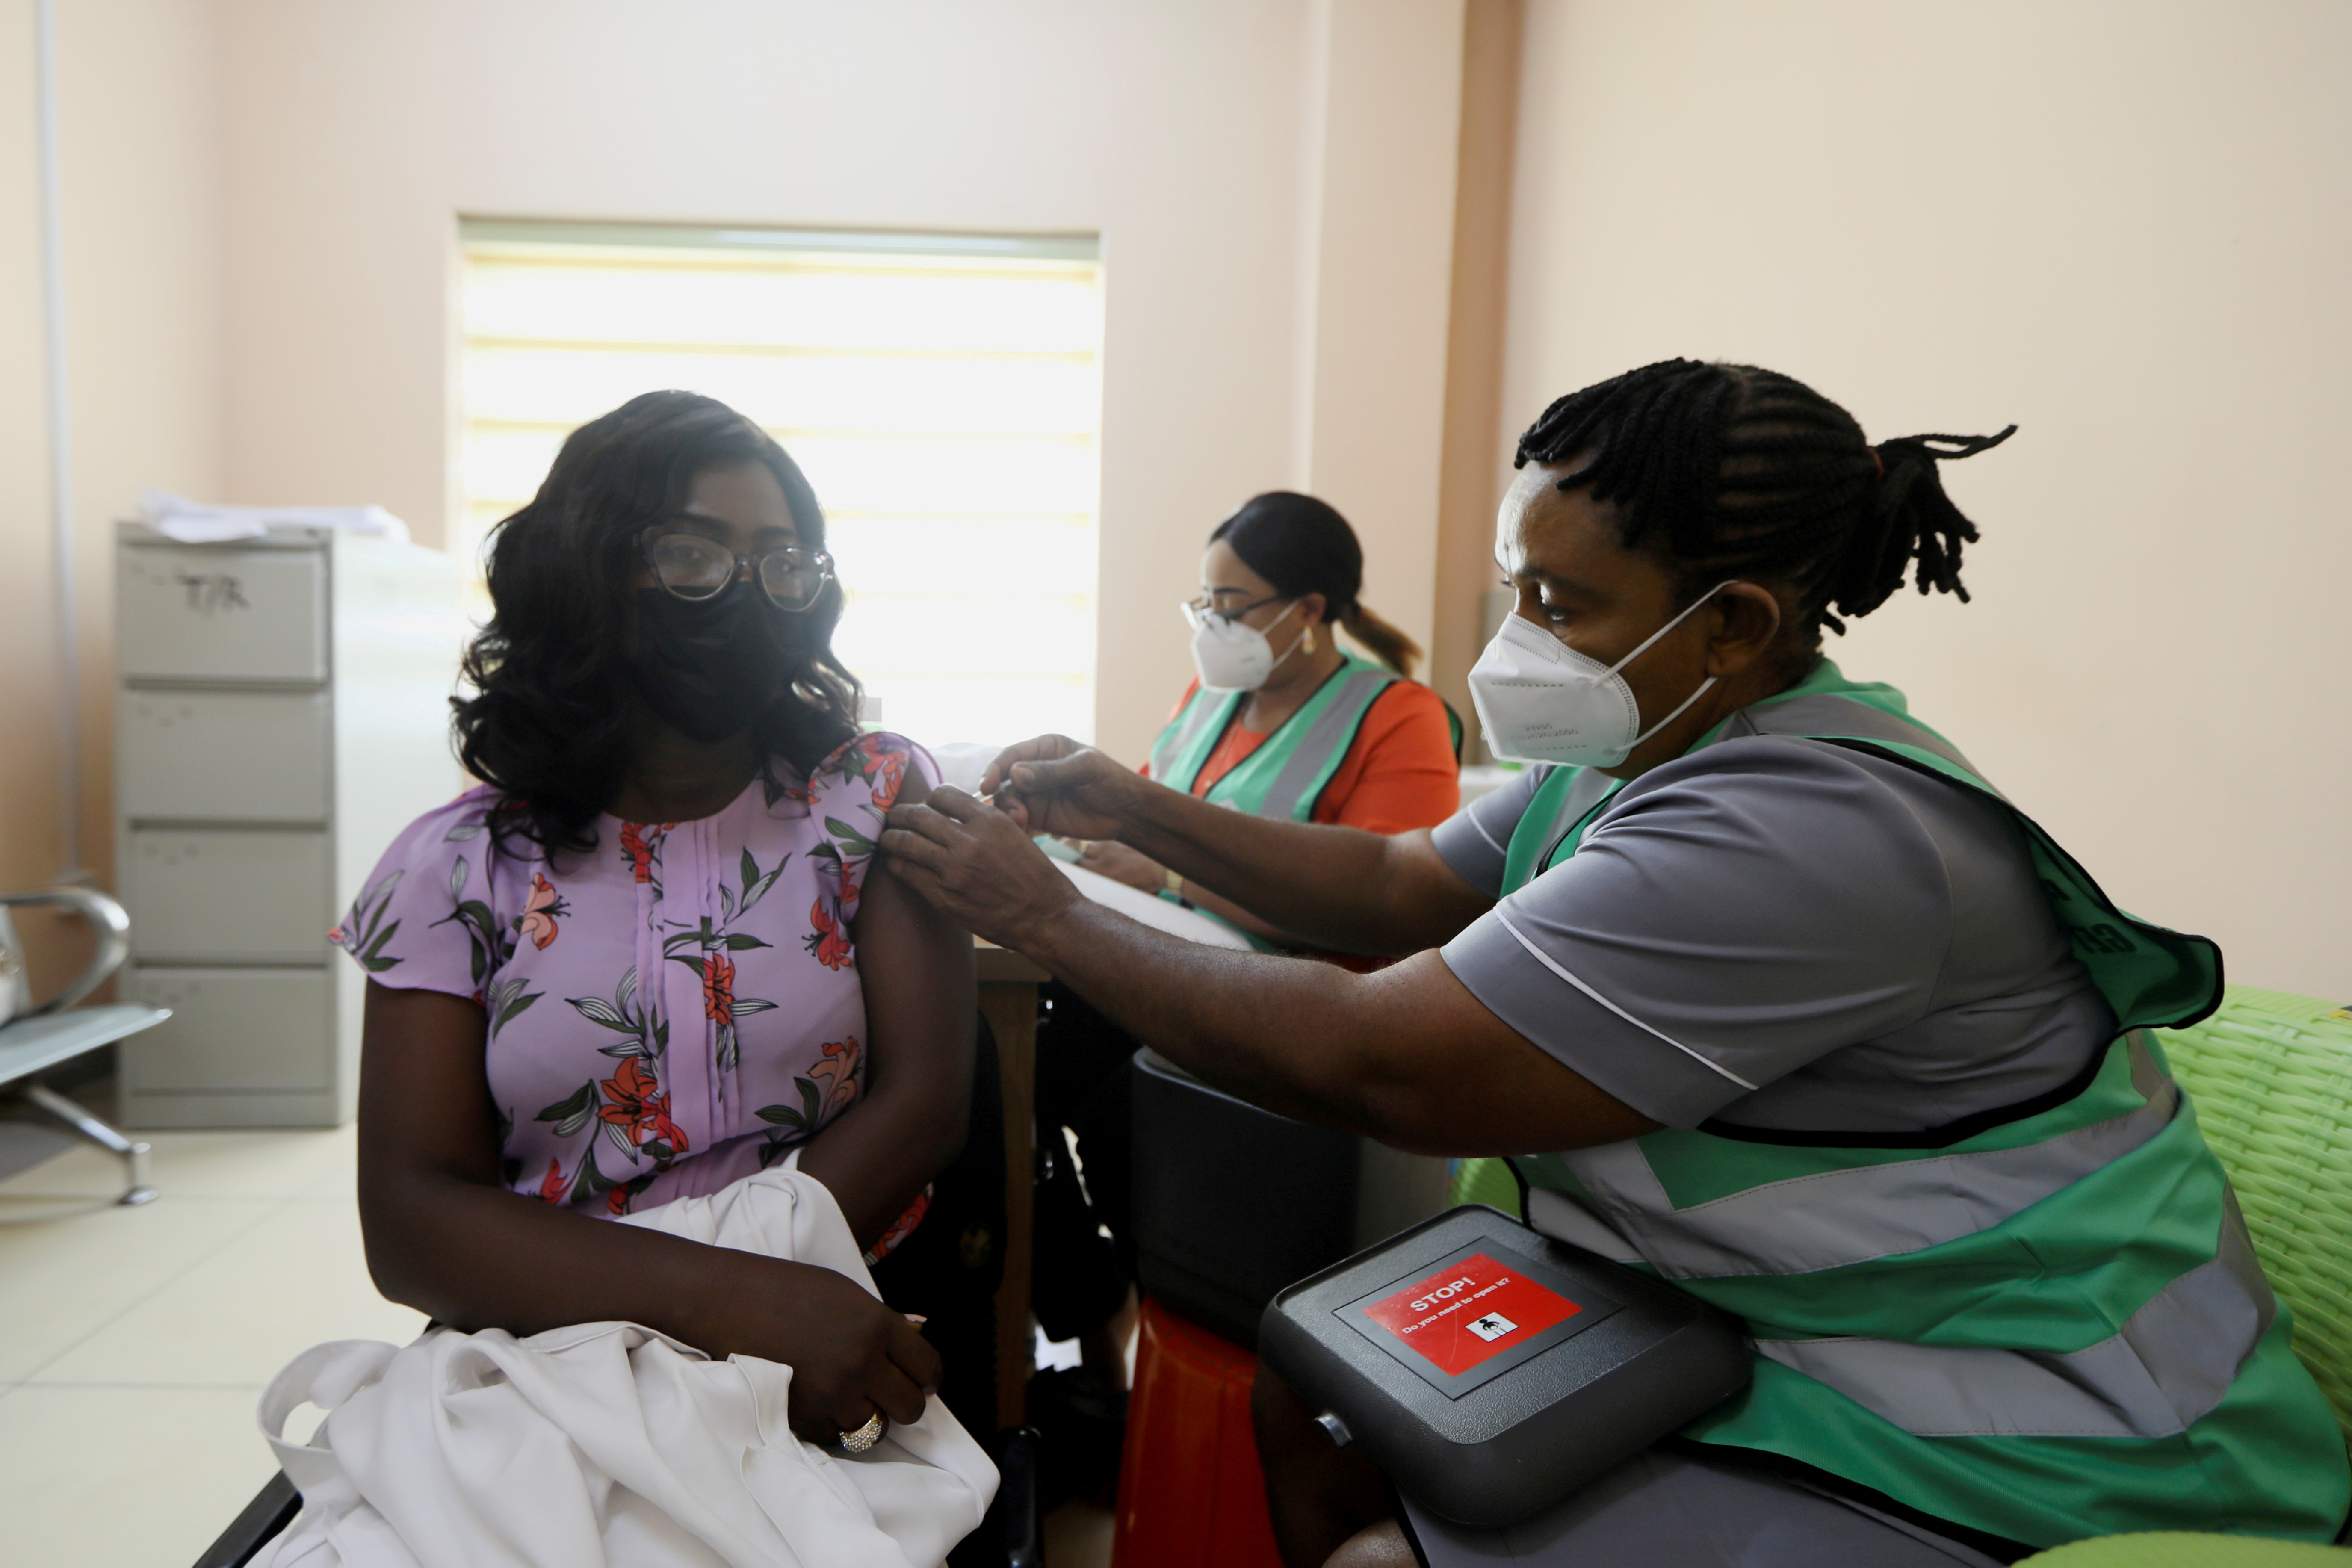 A person receives a dose of the Oxford/AstraZeneca coronavirus vaccine at the National hospital in Abuja, Nigeria, March 5, 2021. REUTERS/Afolabi Sotunde